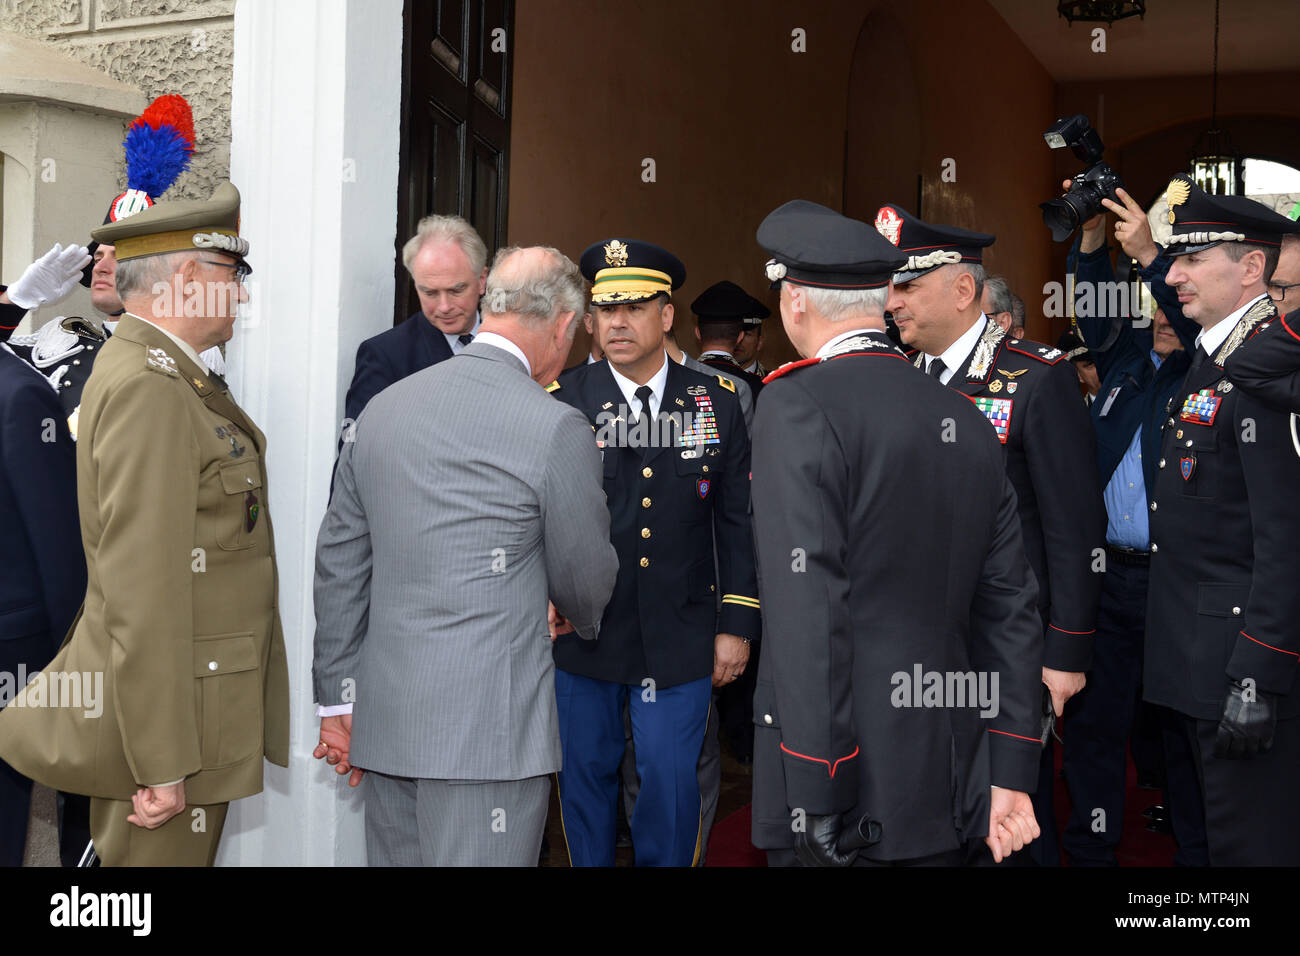 His Royal Highness, Prince Charles, Prince of Wales, meets U.S. Army Col. Darius S. Gallegos, CoESPU deputy director, during visit at the Center of Excellence for Stability Police Units (CoESPU) Vicenza, Italy, April 1, 2017. (U.S. Army Photo by Visual Information Specialist Paolo Bovo/released) Stock Photo